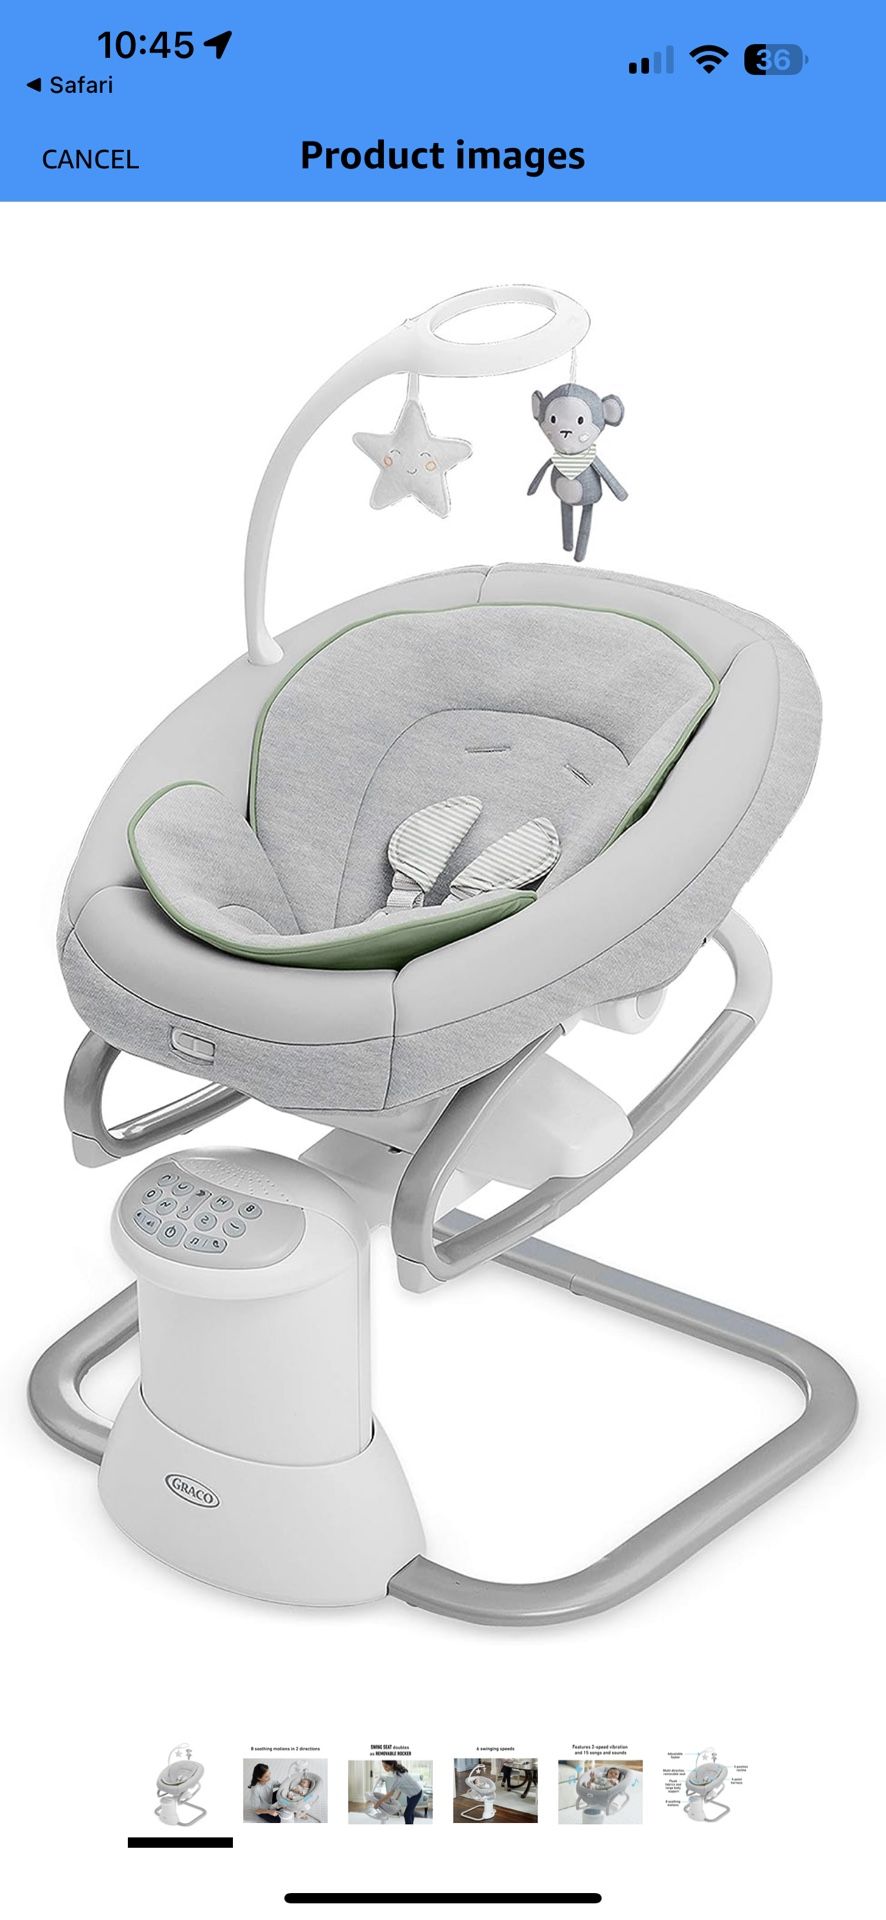 Graco-Soothe My Way Swing 